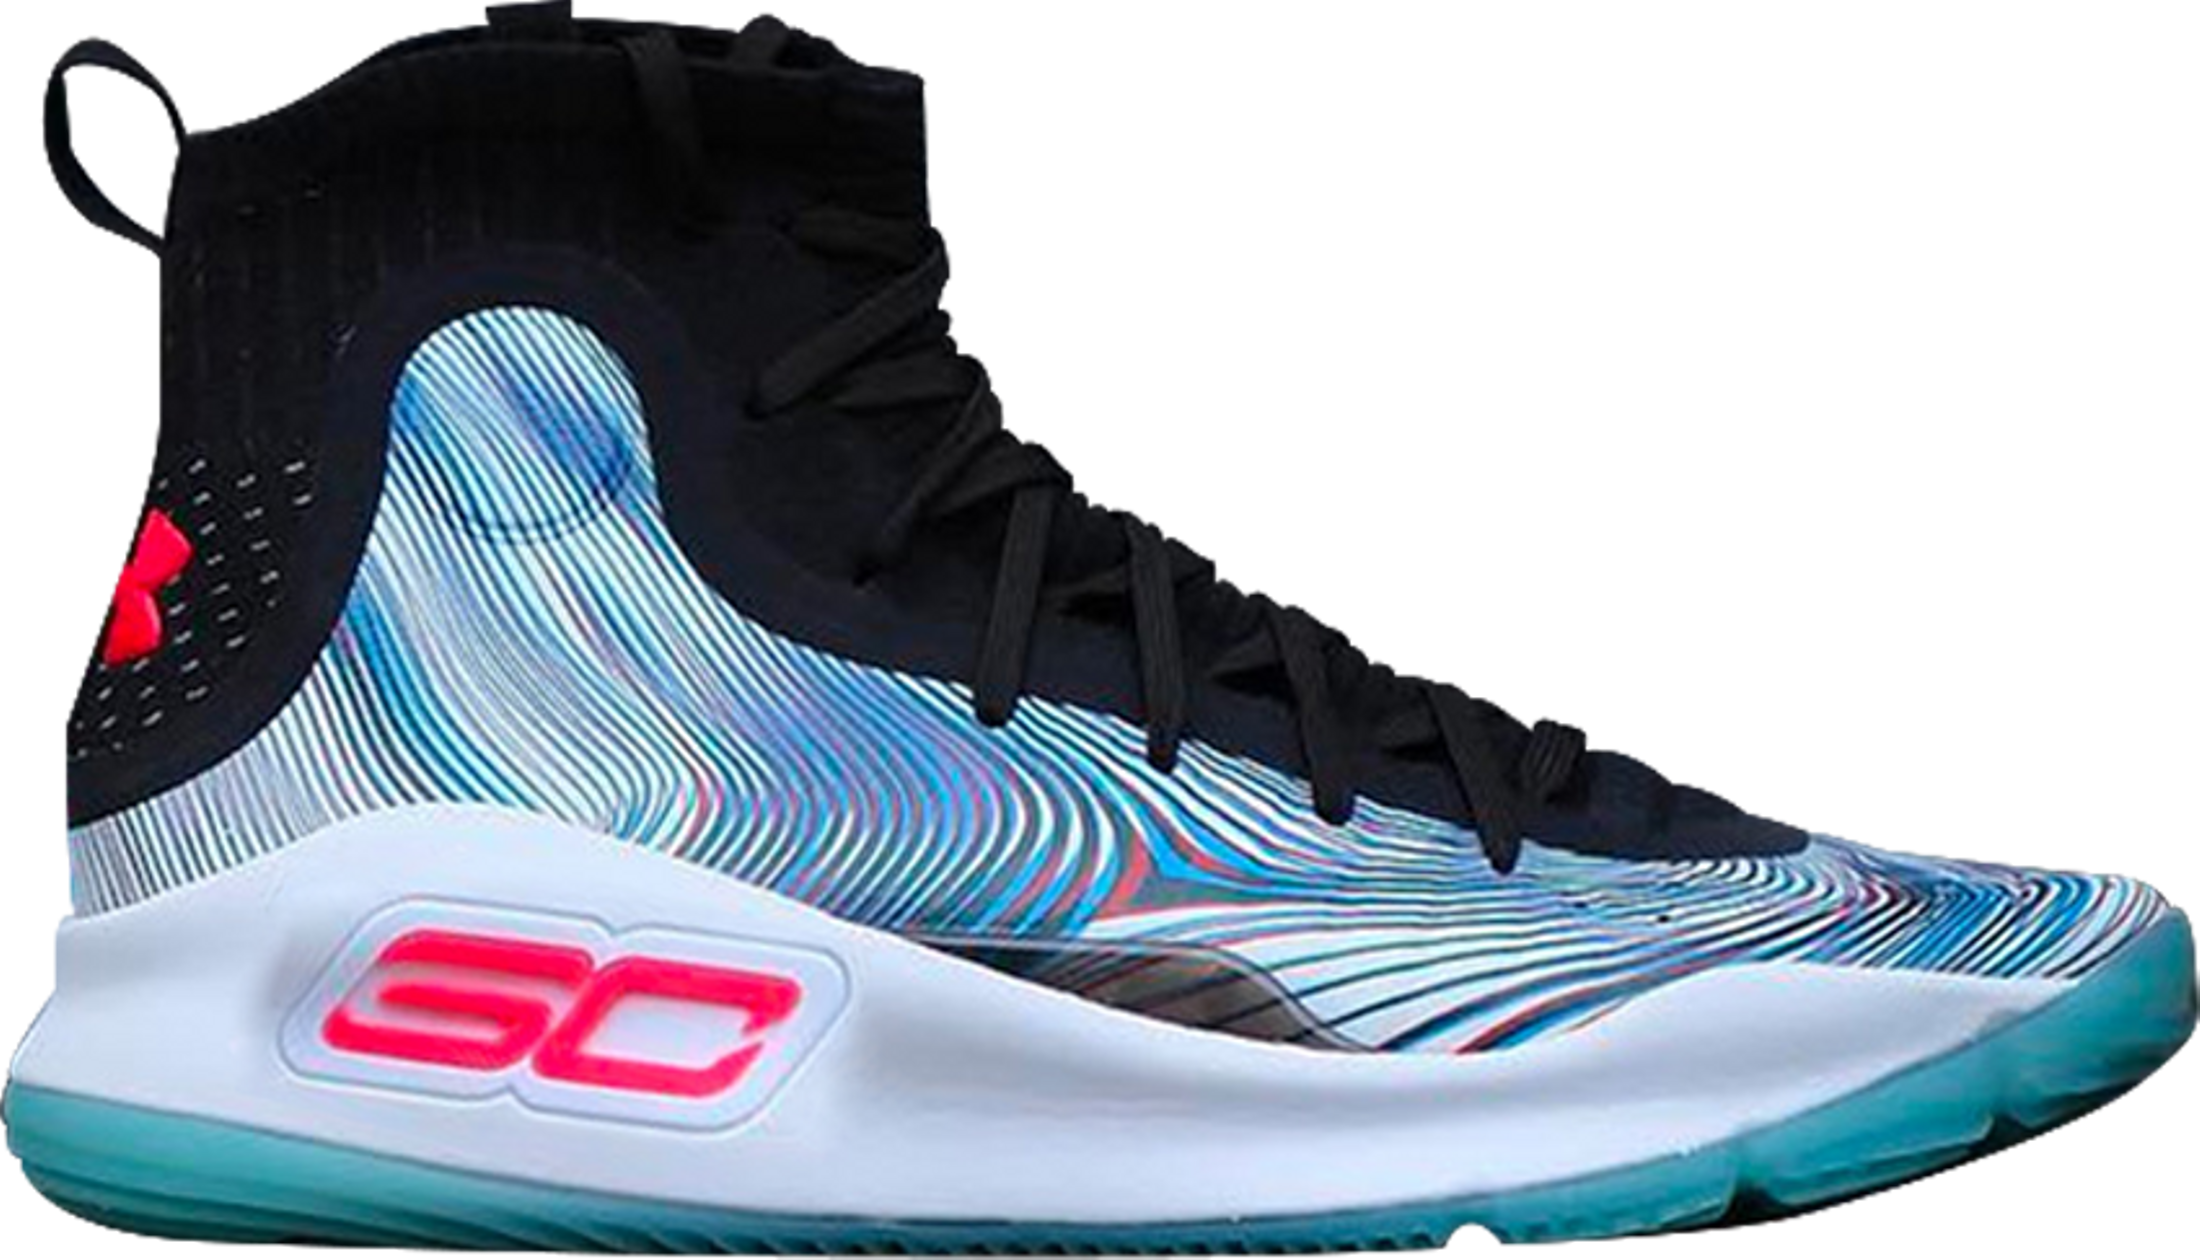 Buy Curry 4 'More Magic' 2017 - 1298306 016 - Multi-Color | GOAT